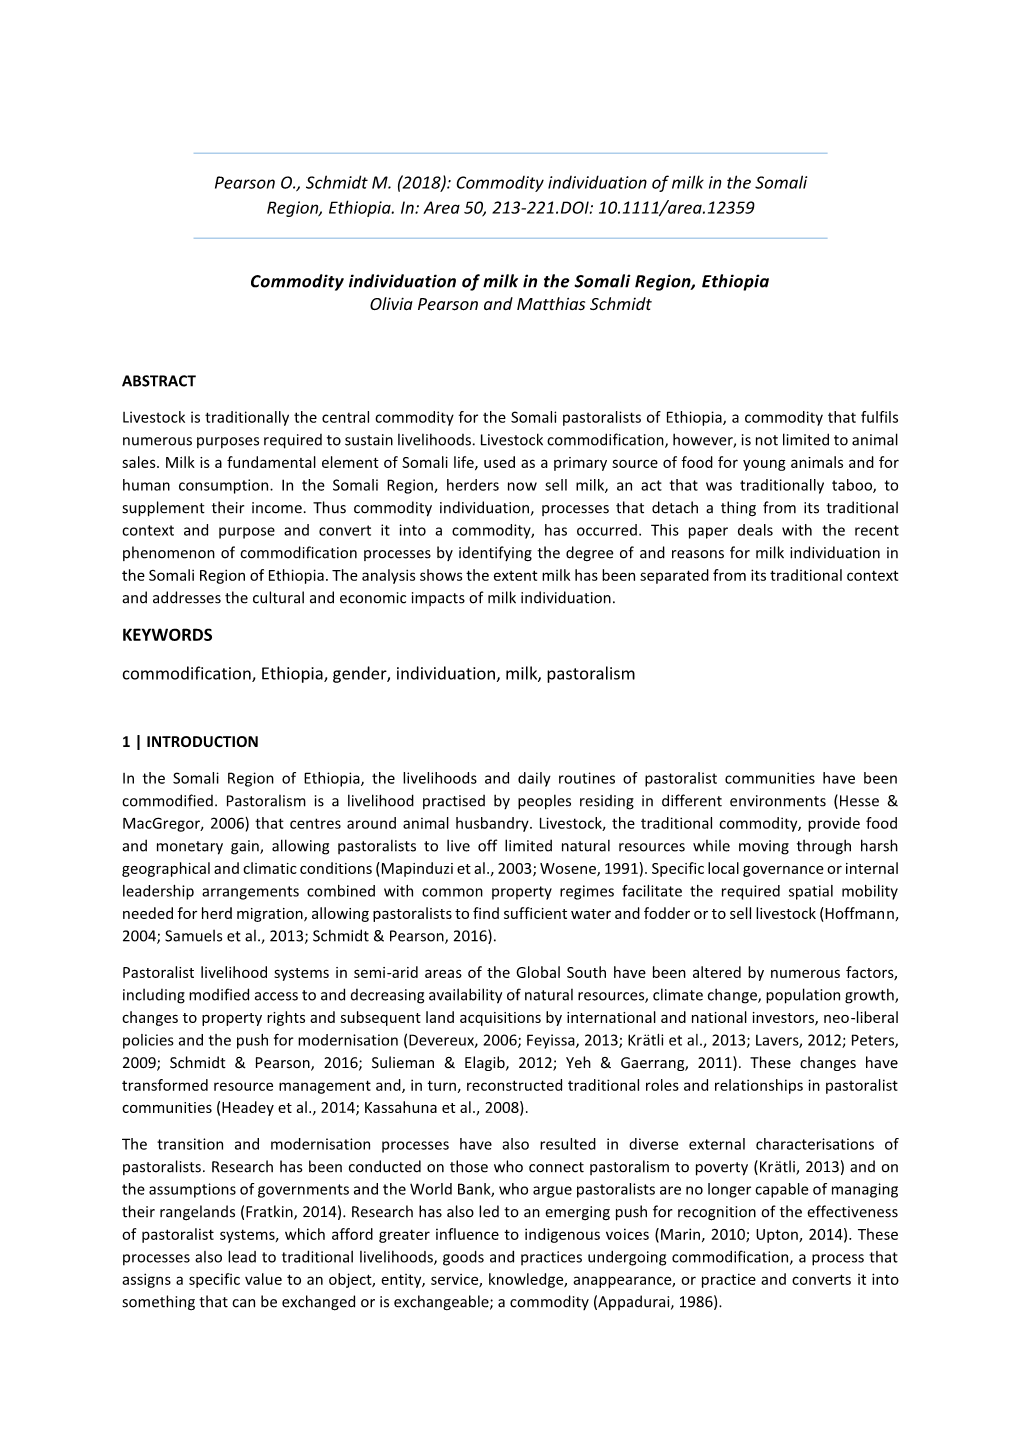 (2018) Commodity Individuation of Milk in the Somali Region